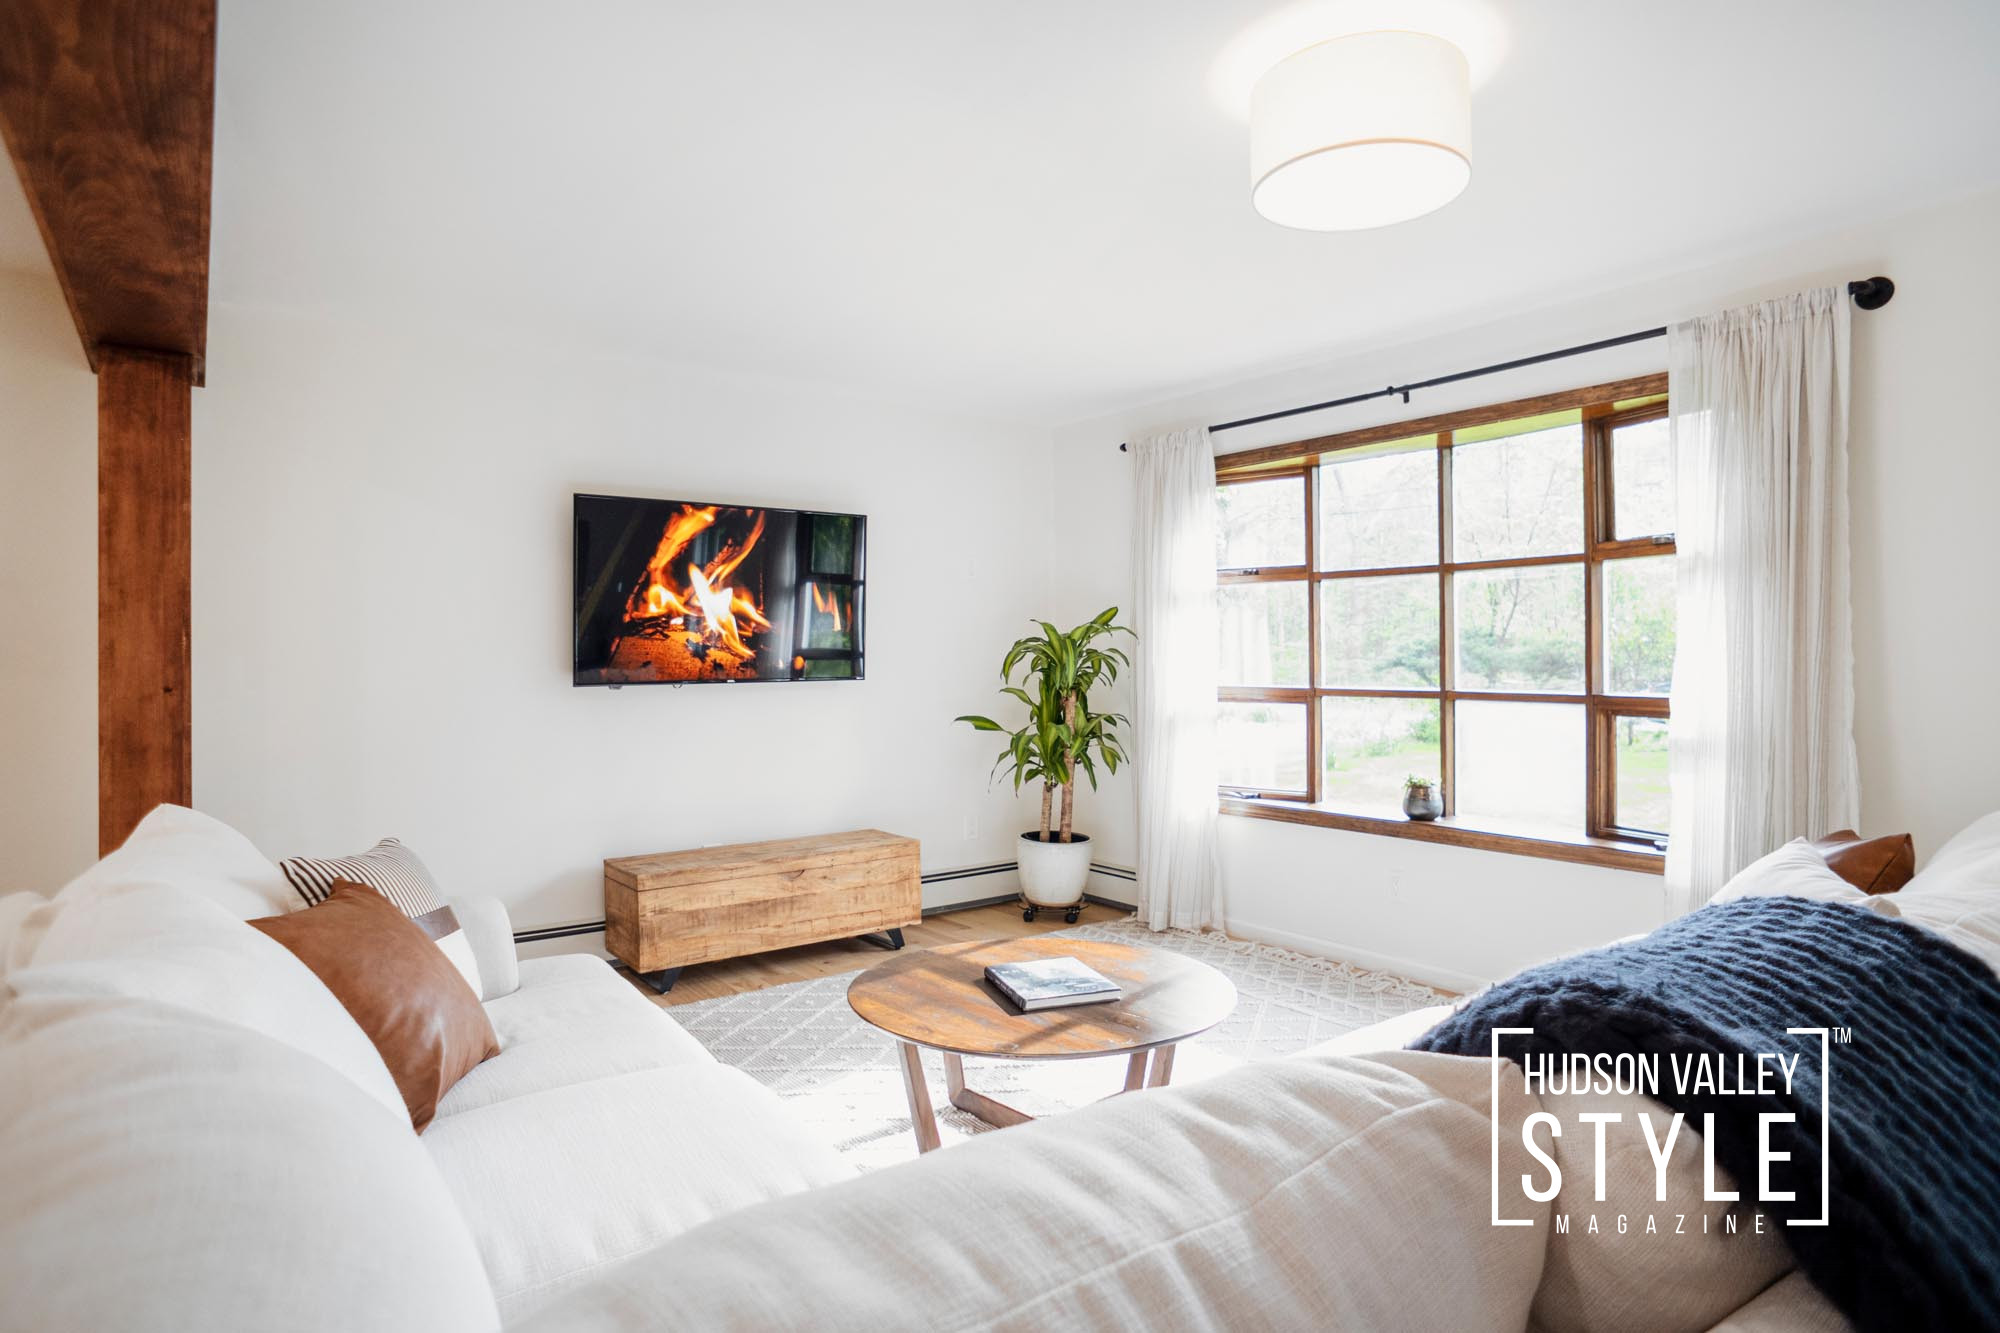 Discover Hudson Valley and stay in the newly renovated Airbnb home in Staatsburg, NY – Photography by Maxwell Alexander / ALLUVION MEDIA – Vacation Rental Management – Upstate NY Airbnb Photographer